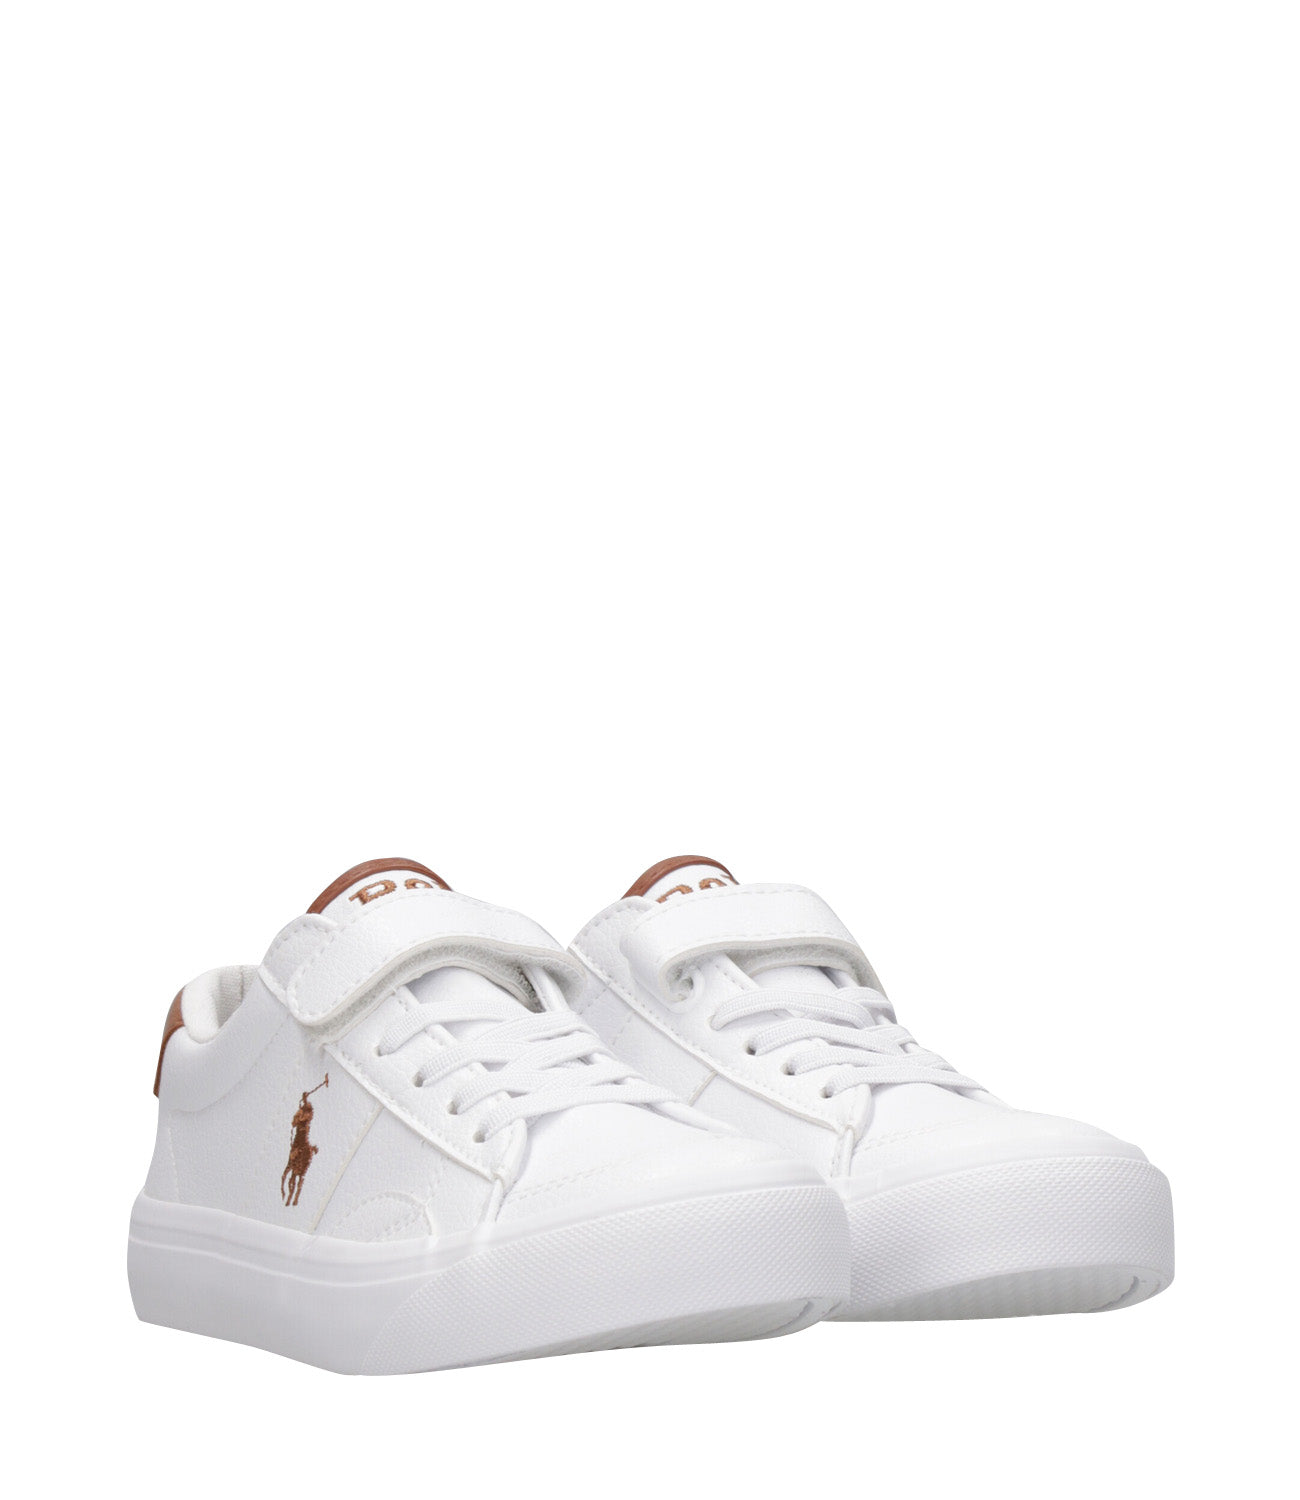 Ralph Lauren Childrenswear | Sneakers Ryley PS White and Brown